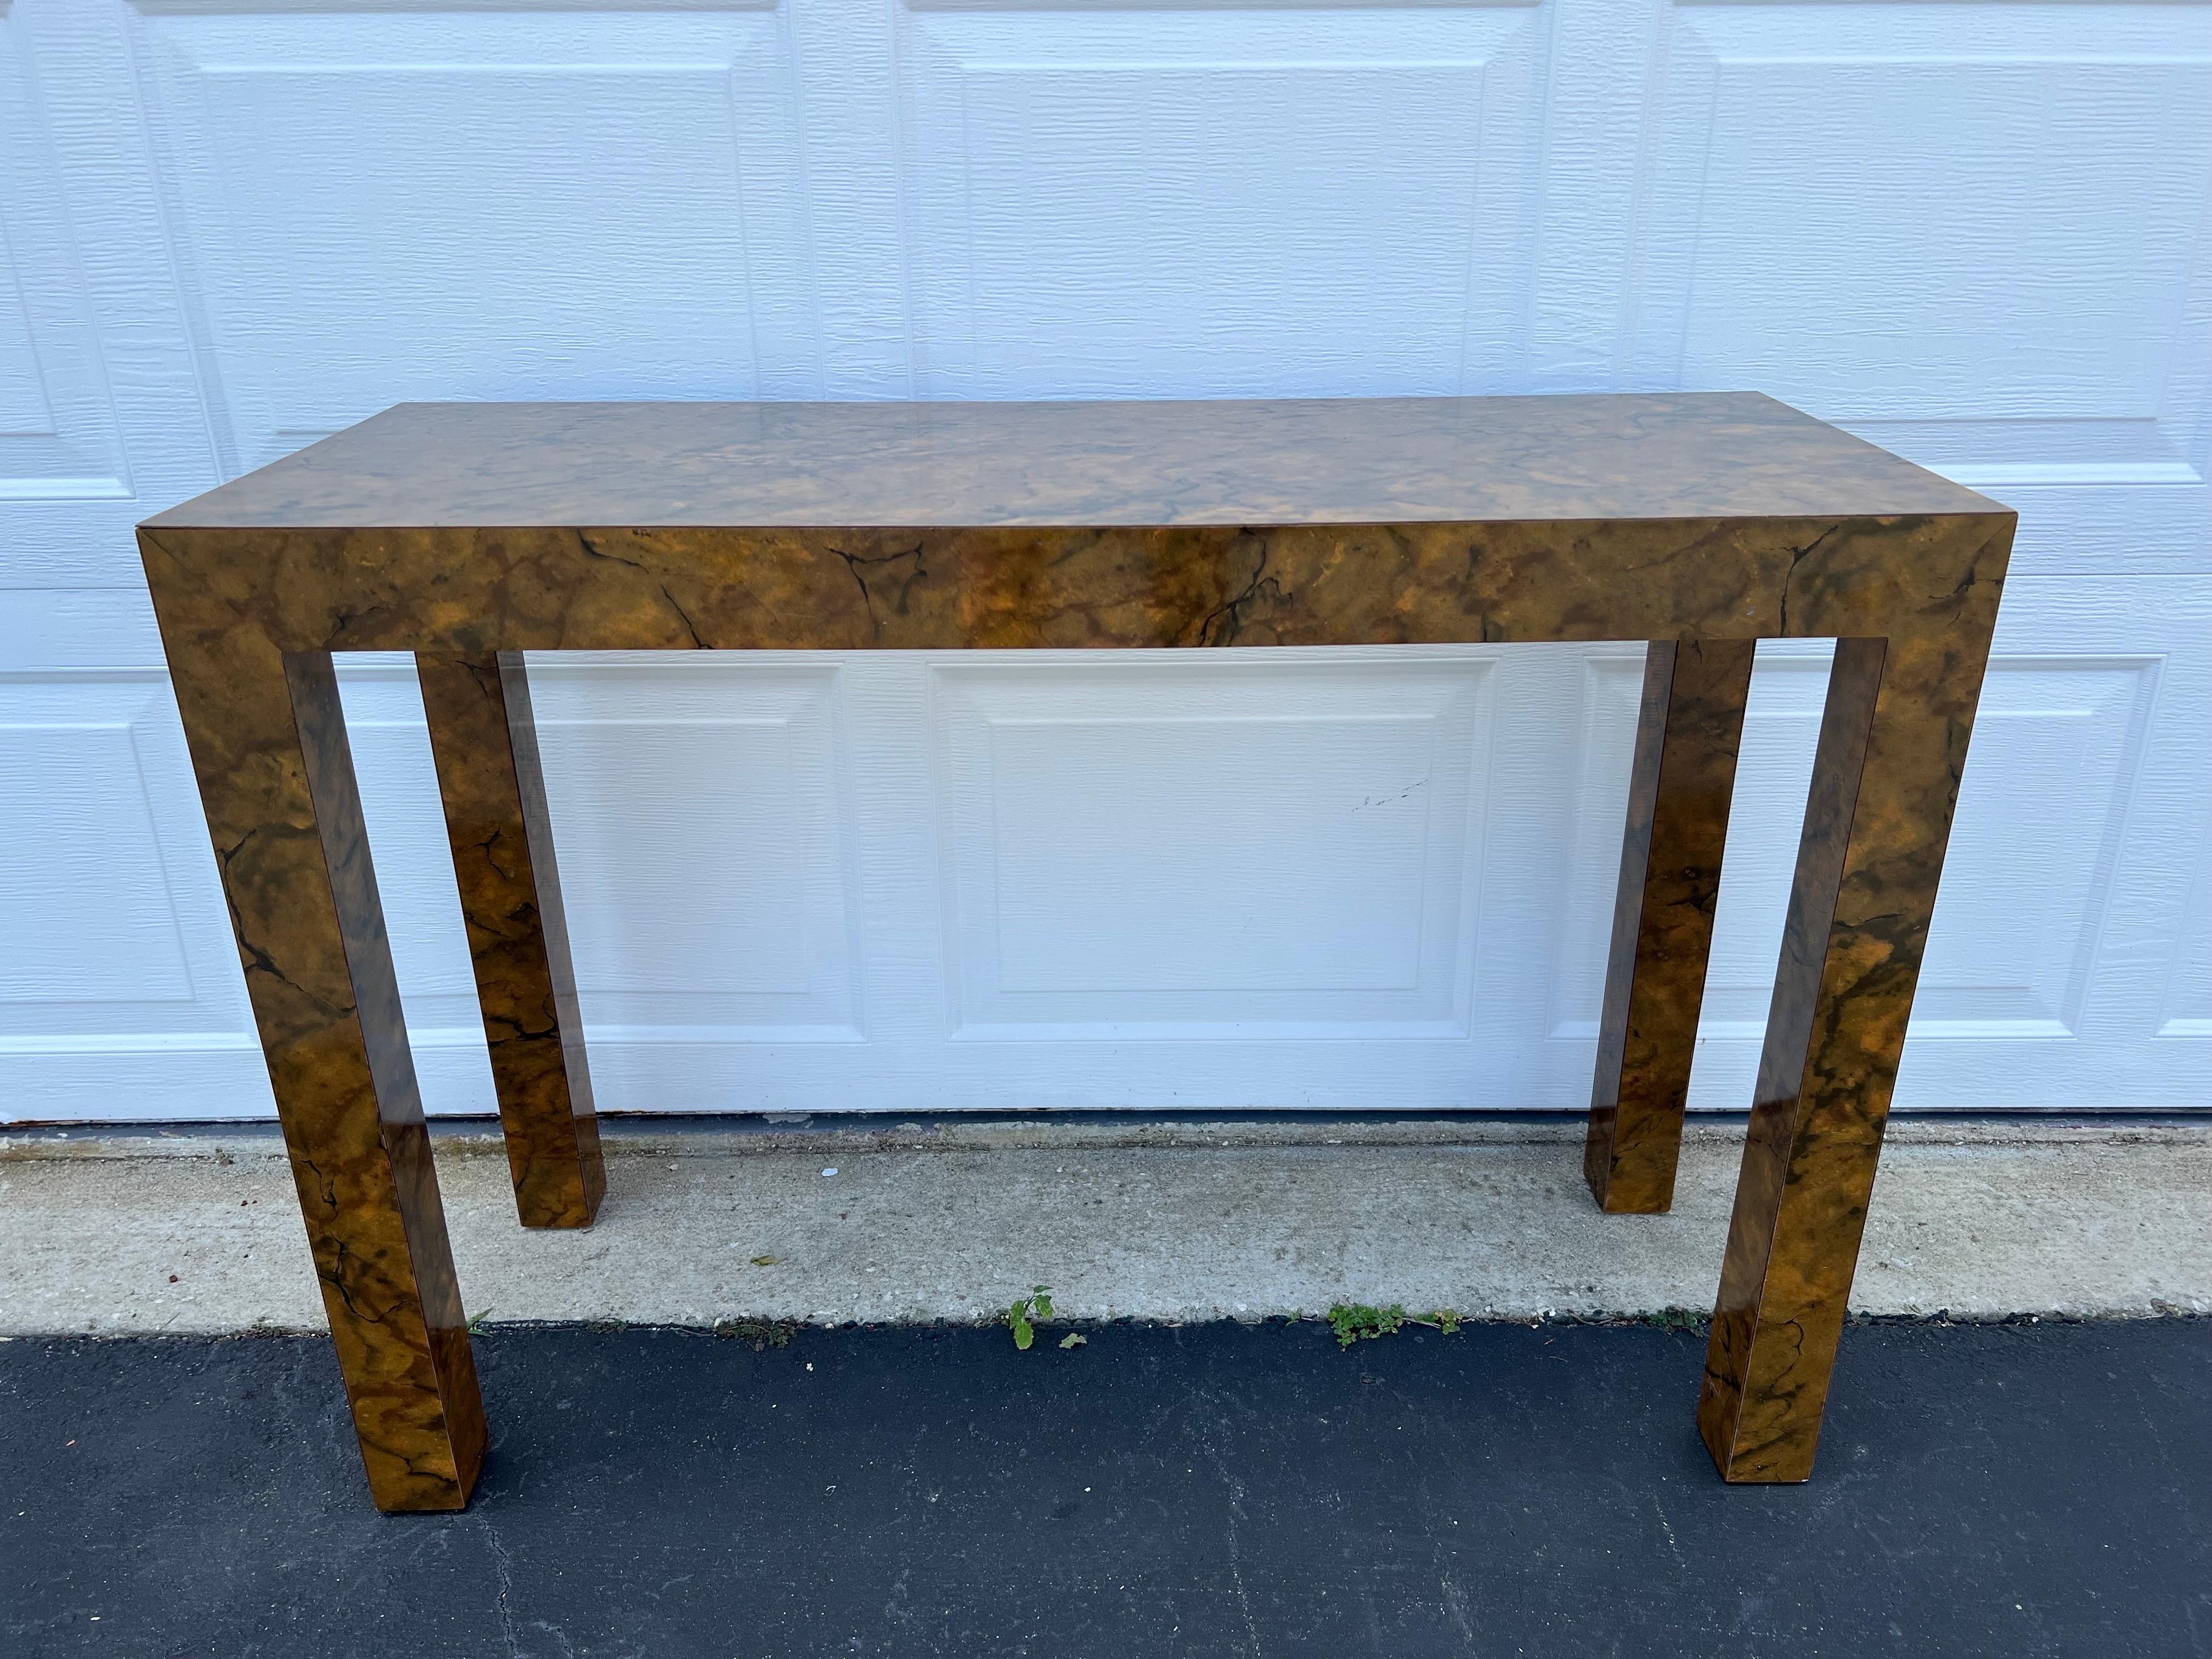 Burl Wood Formica Parsons Console Table. Amazing colors and texture to this petite console table. Good size for smaller hallways or rooms. Milo Baughman style with faux burl wood. Easy clean with a formica finish. 